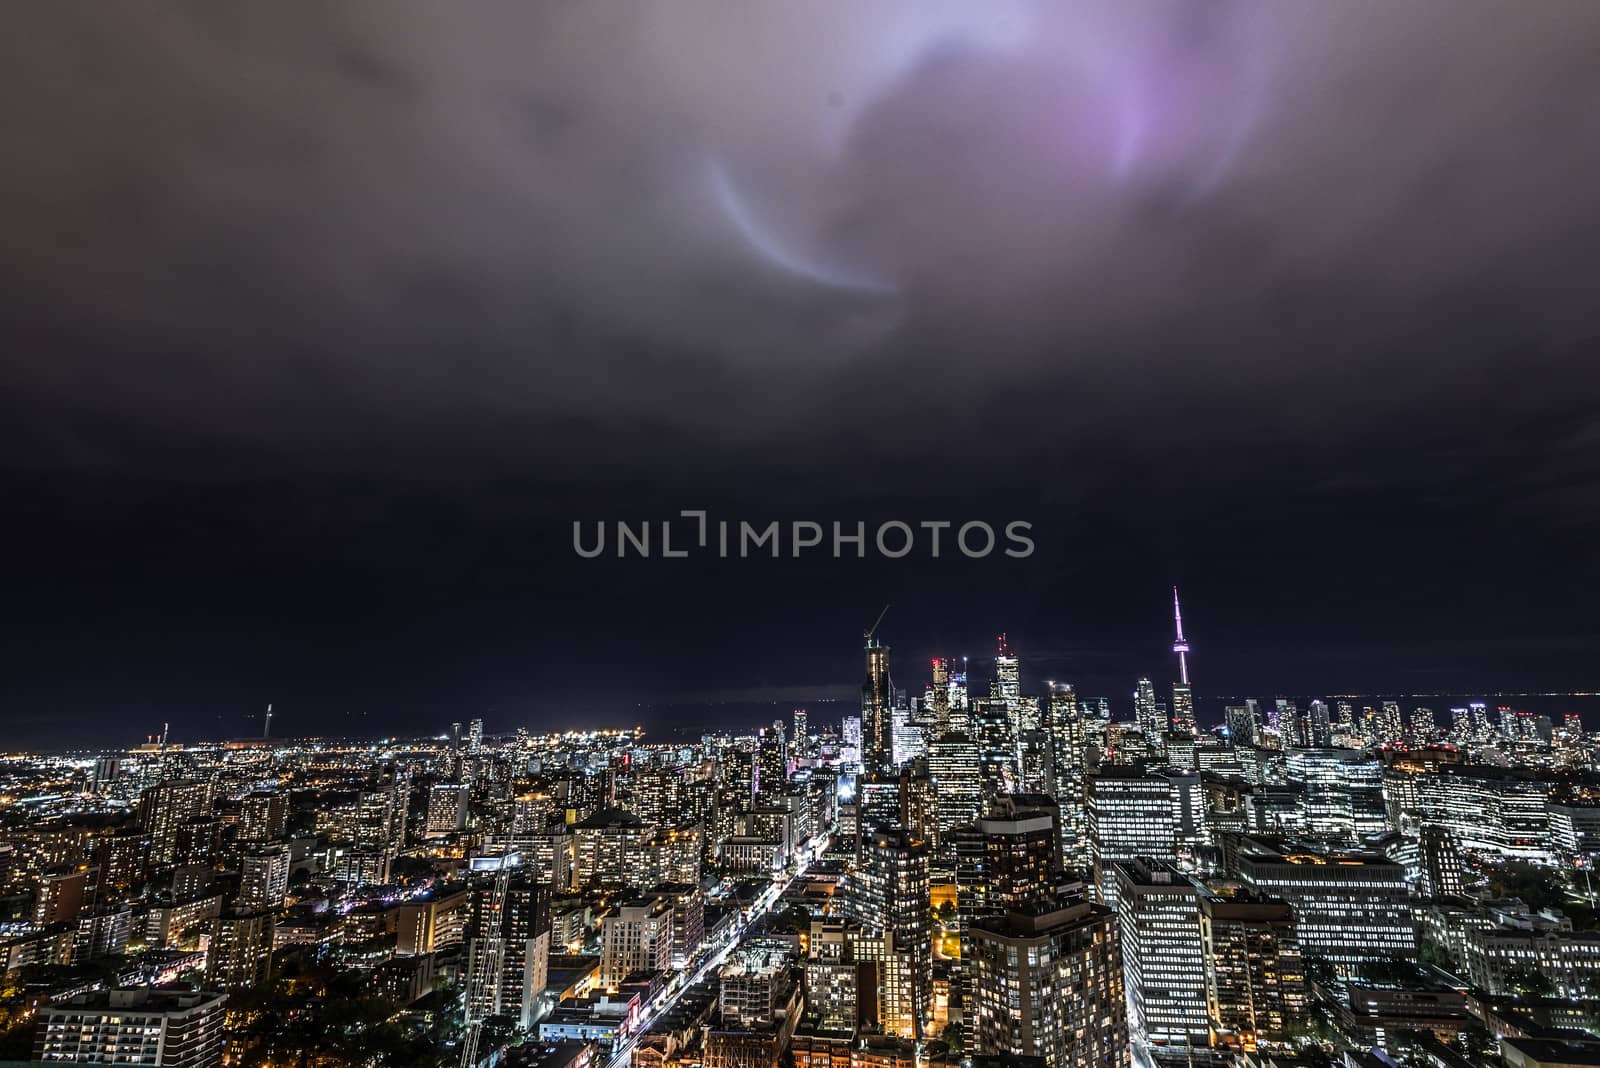 Full view of downtown Toronto at night with glamour spotlights pattern in the sky